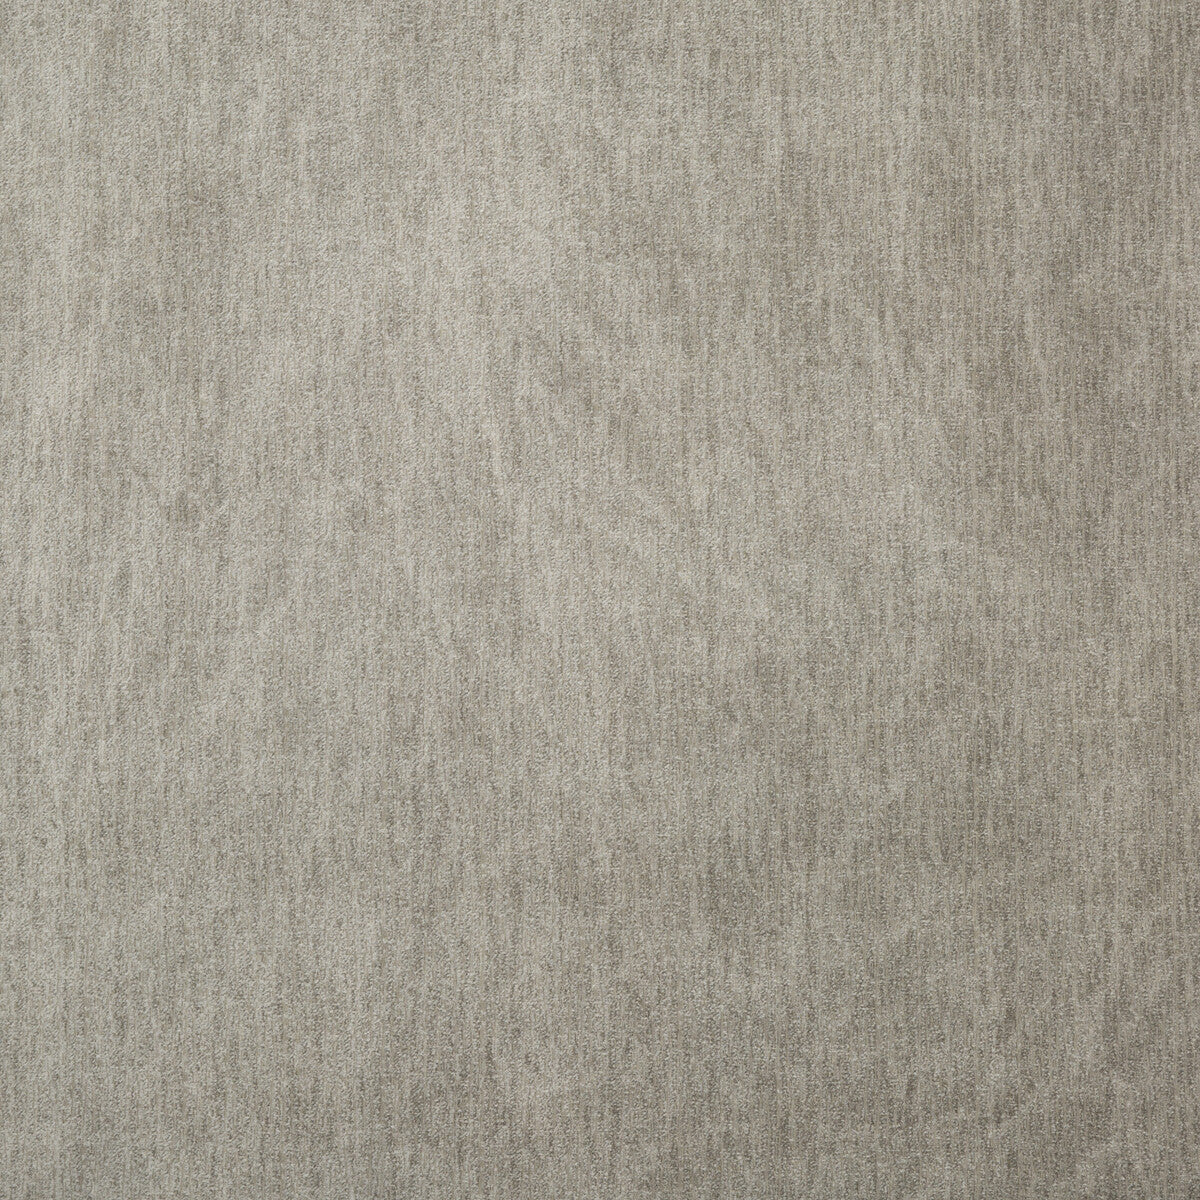 Arapa fabric in taupe color - pattern ED85249.210.0 - by Threads in the Odyssey collection